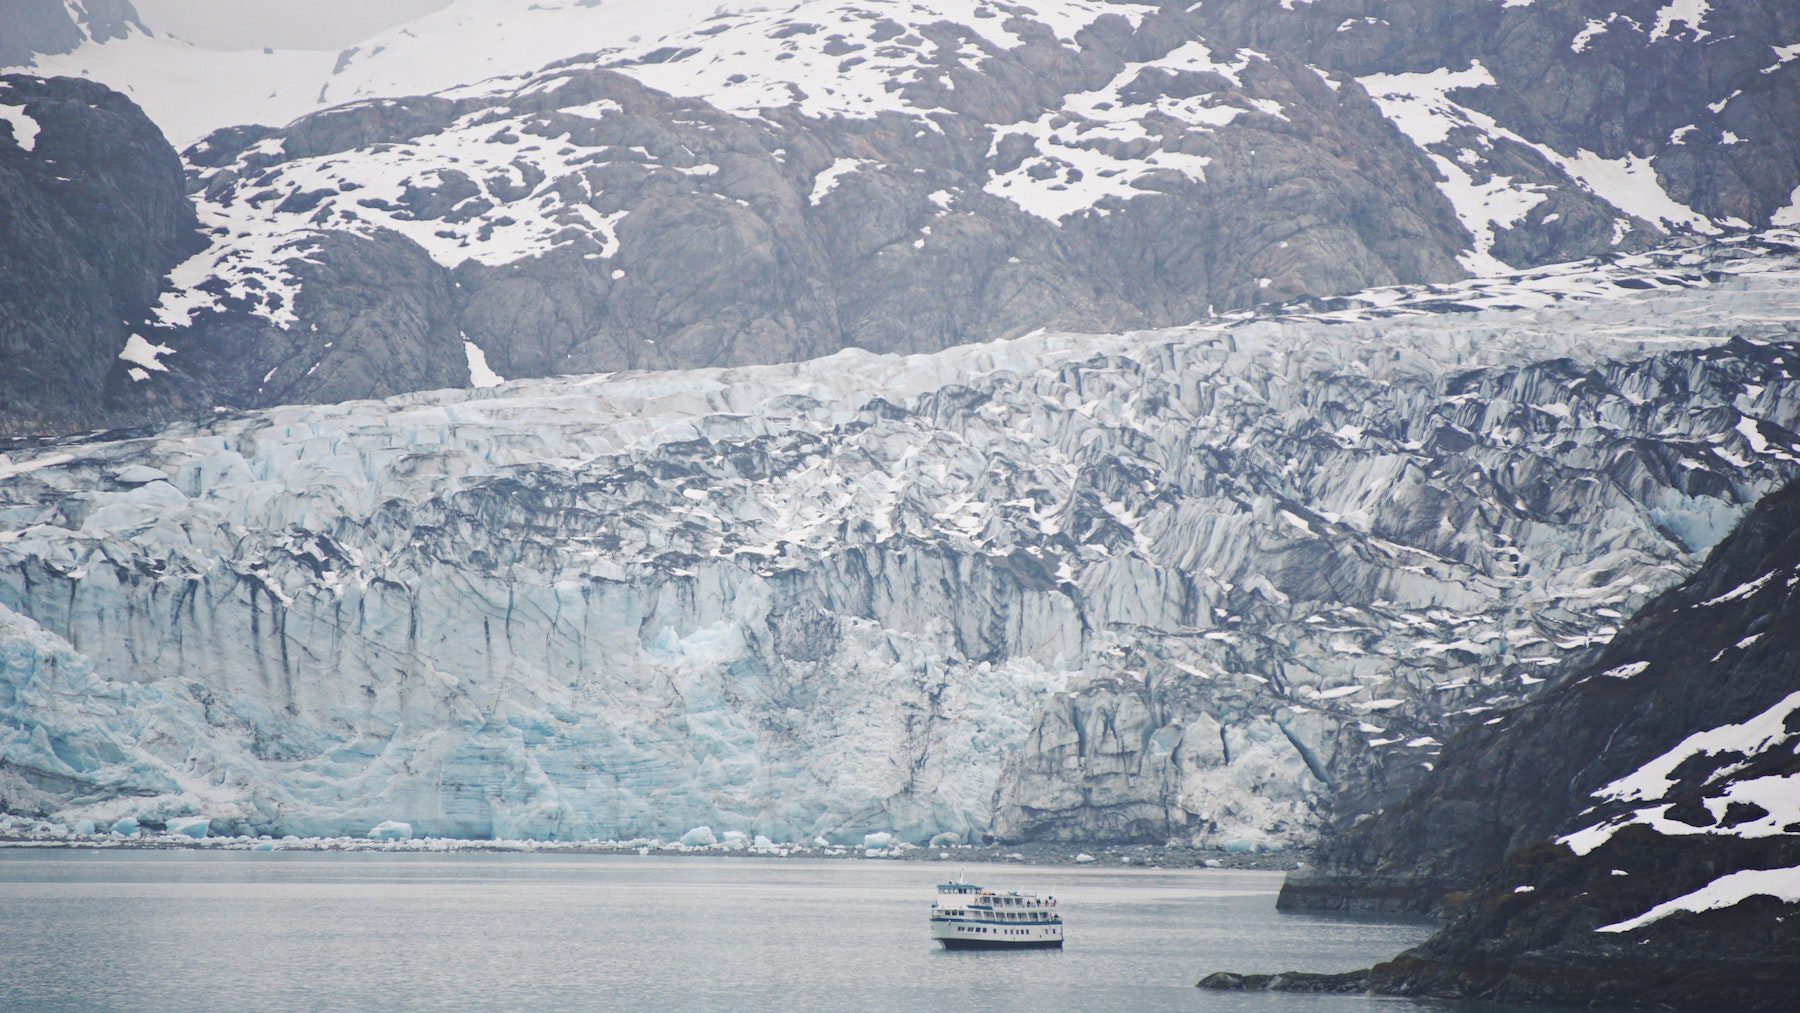 A cruise ship navigating the waters of Glacier Bay National Park in Alaska, alongside a glacier and snowy mountain.